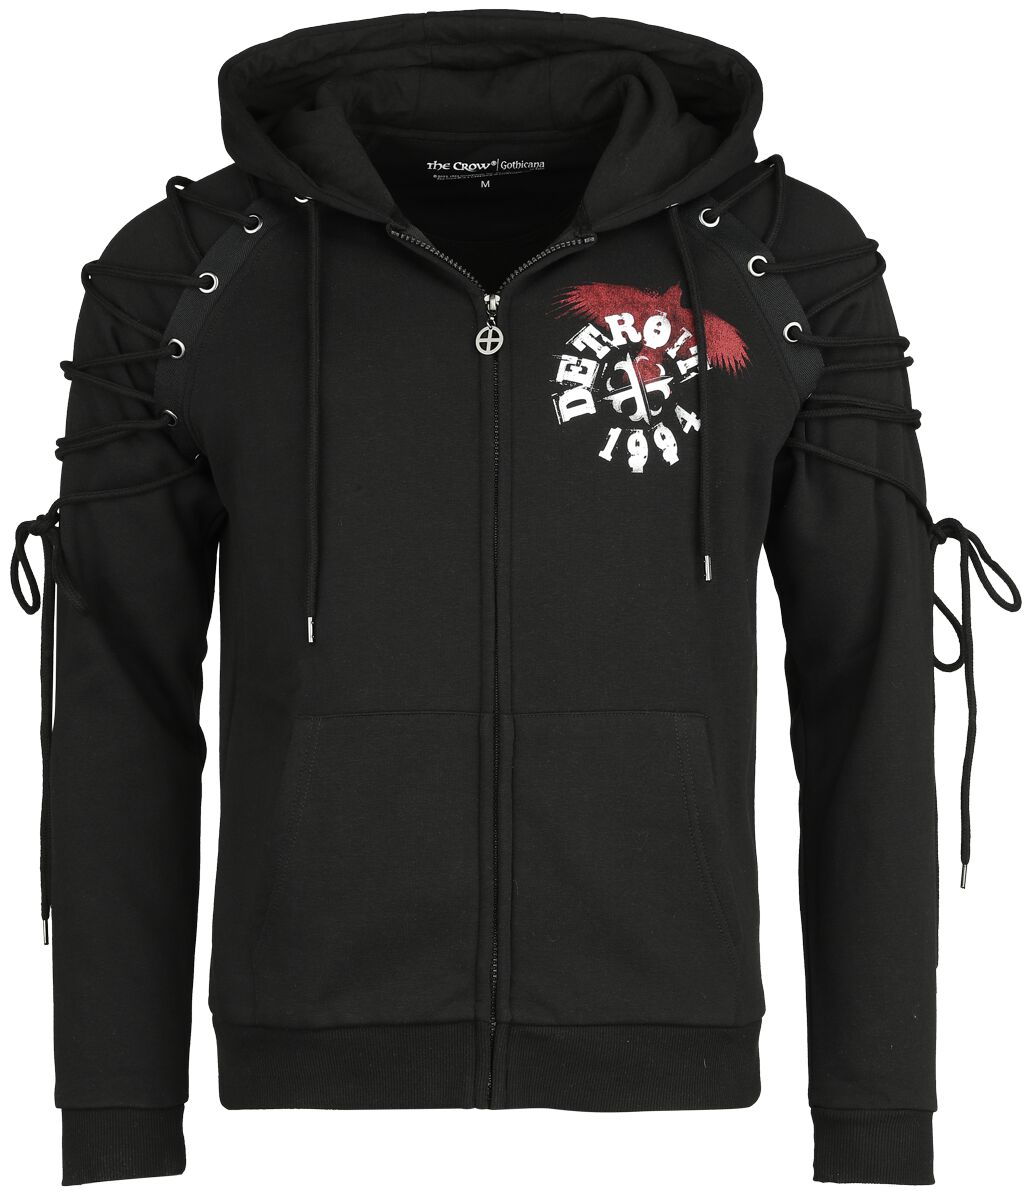 Gothicana X The Crow Hoodie Jacket | Gothicana by EMP Hooded zip | EMP